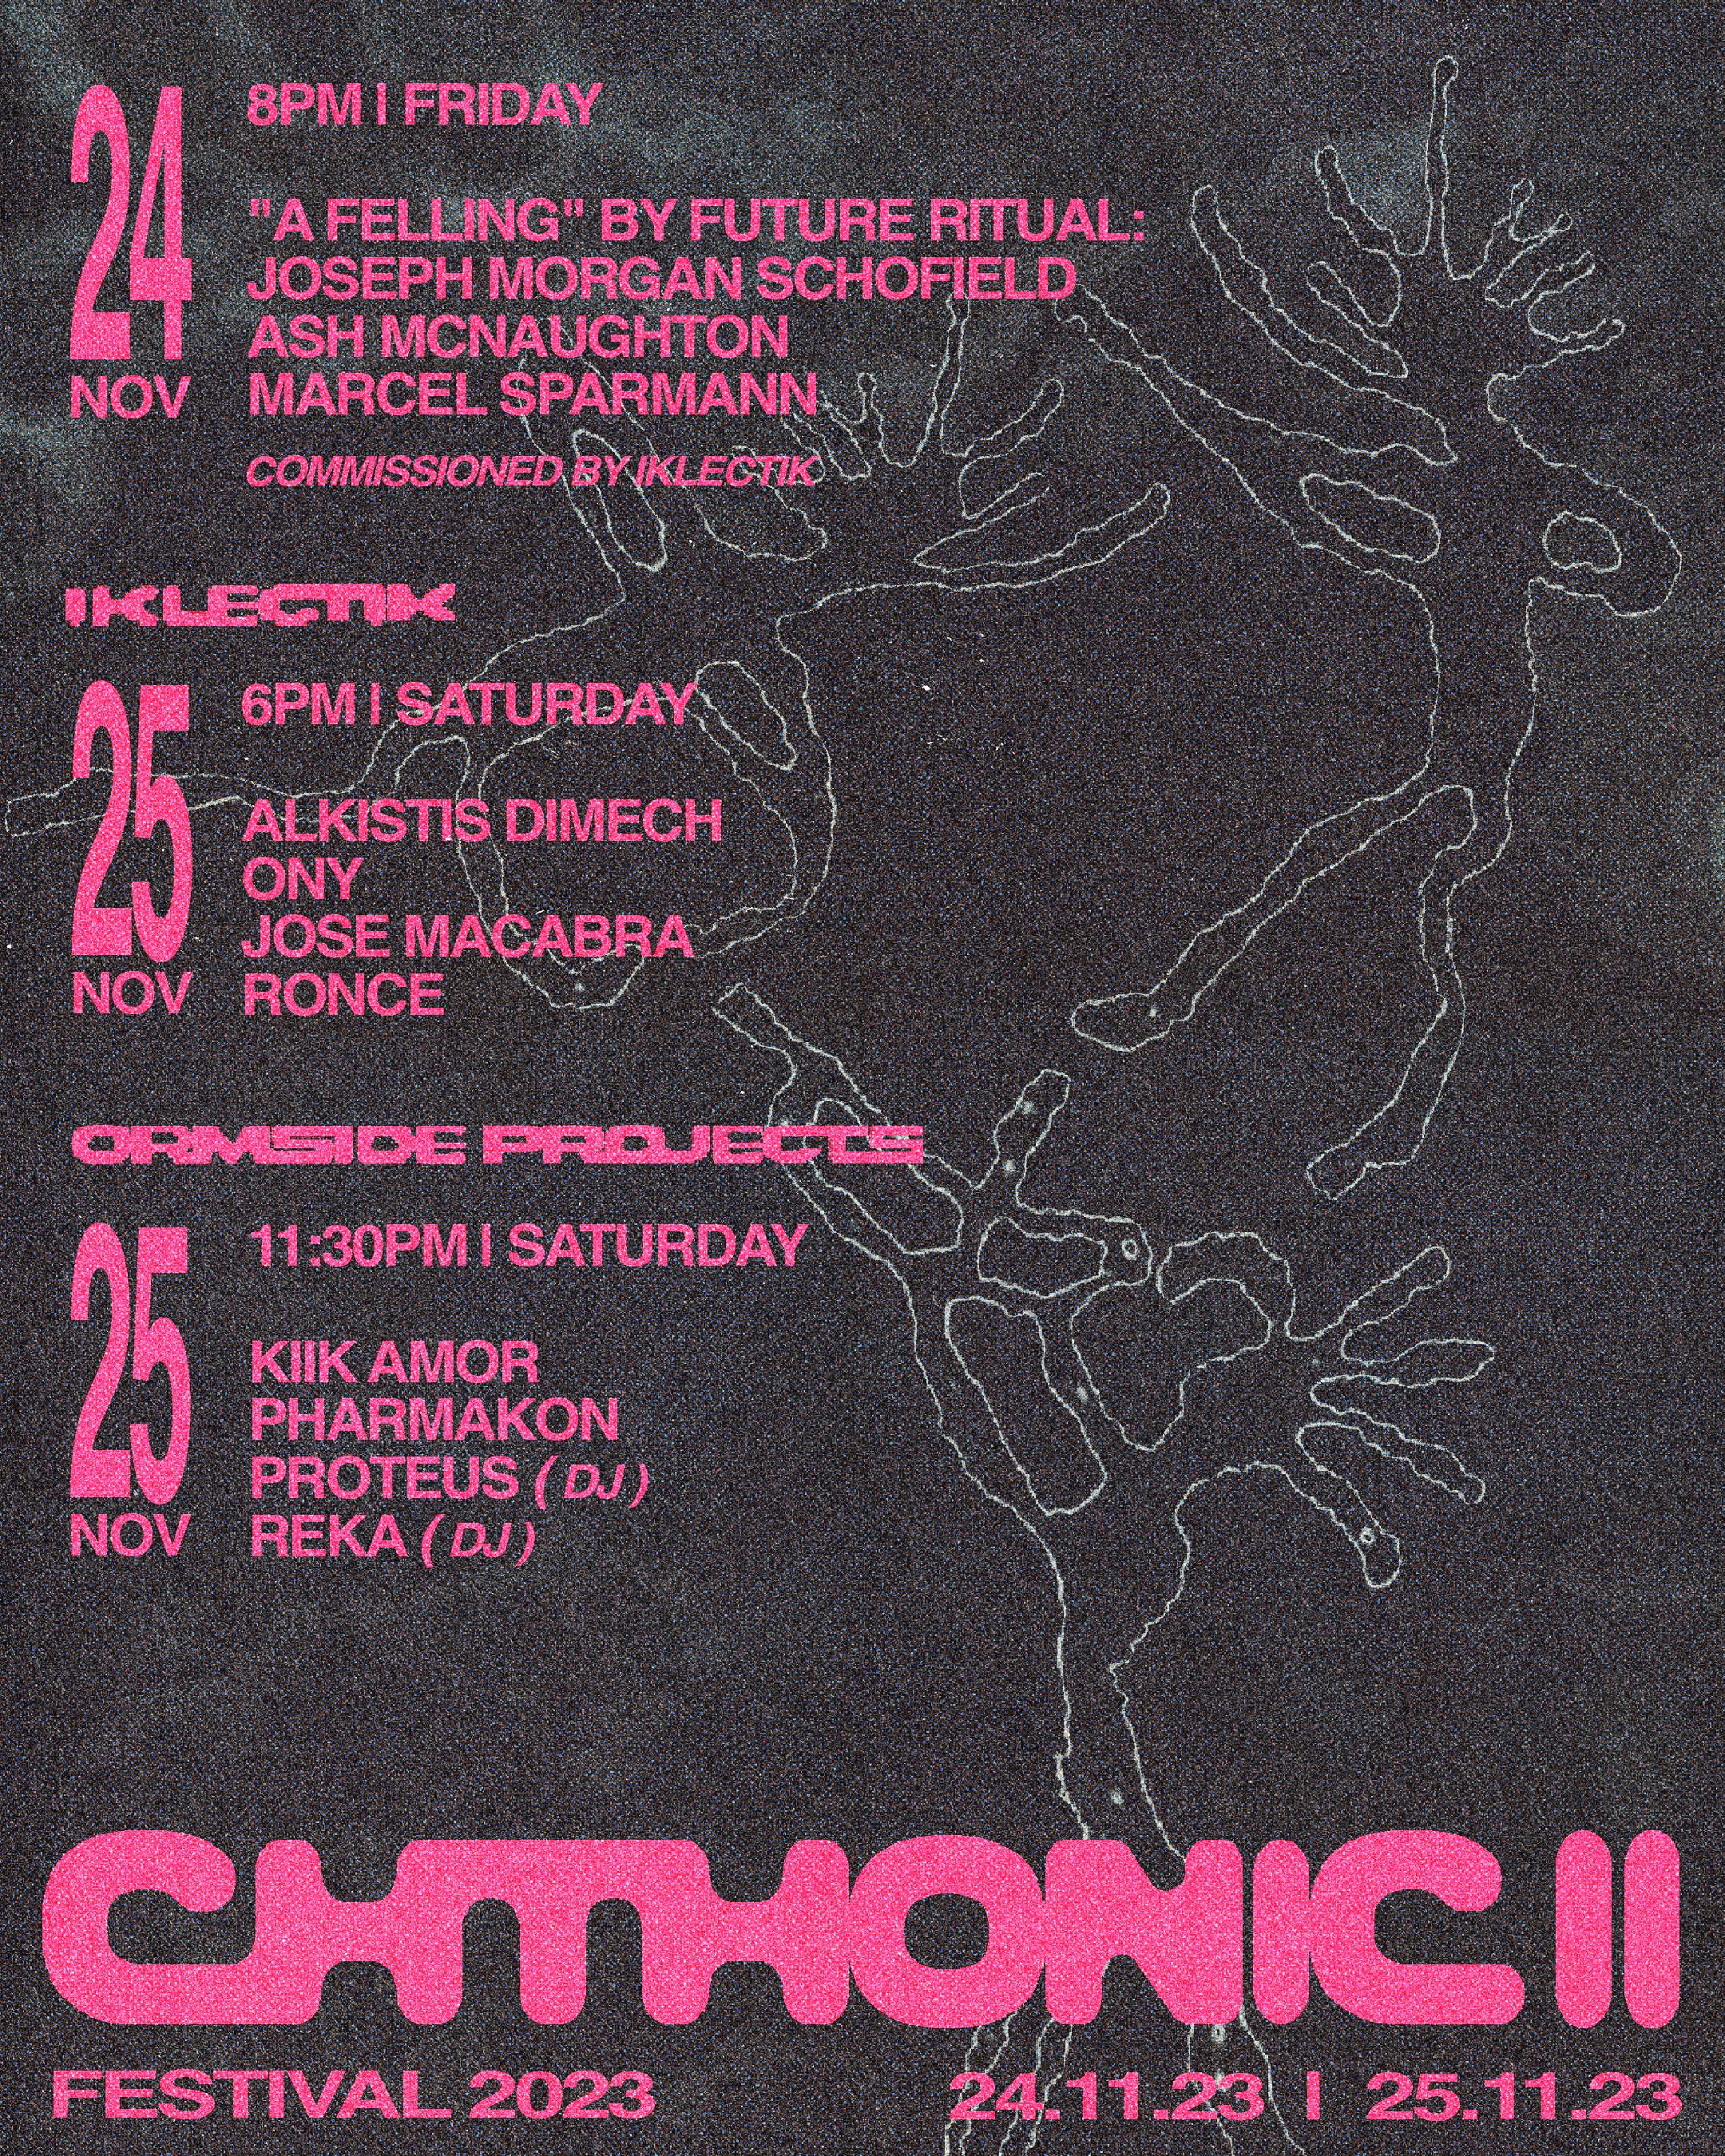 CHTHONIC II at Ormside Projects - フライヤー裏